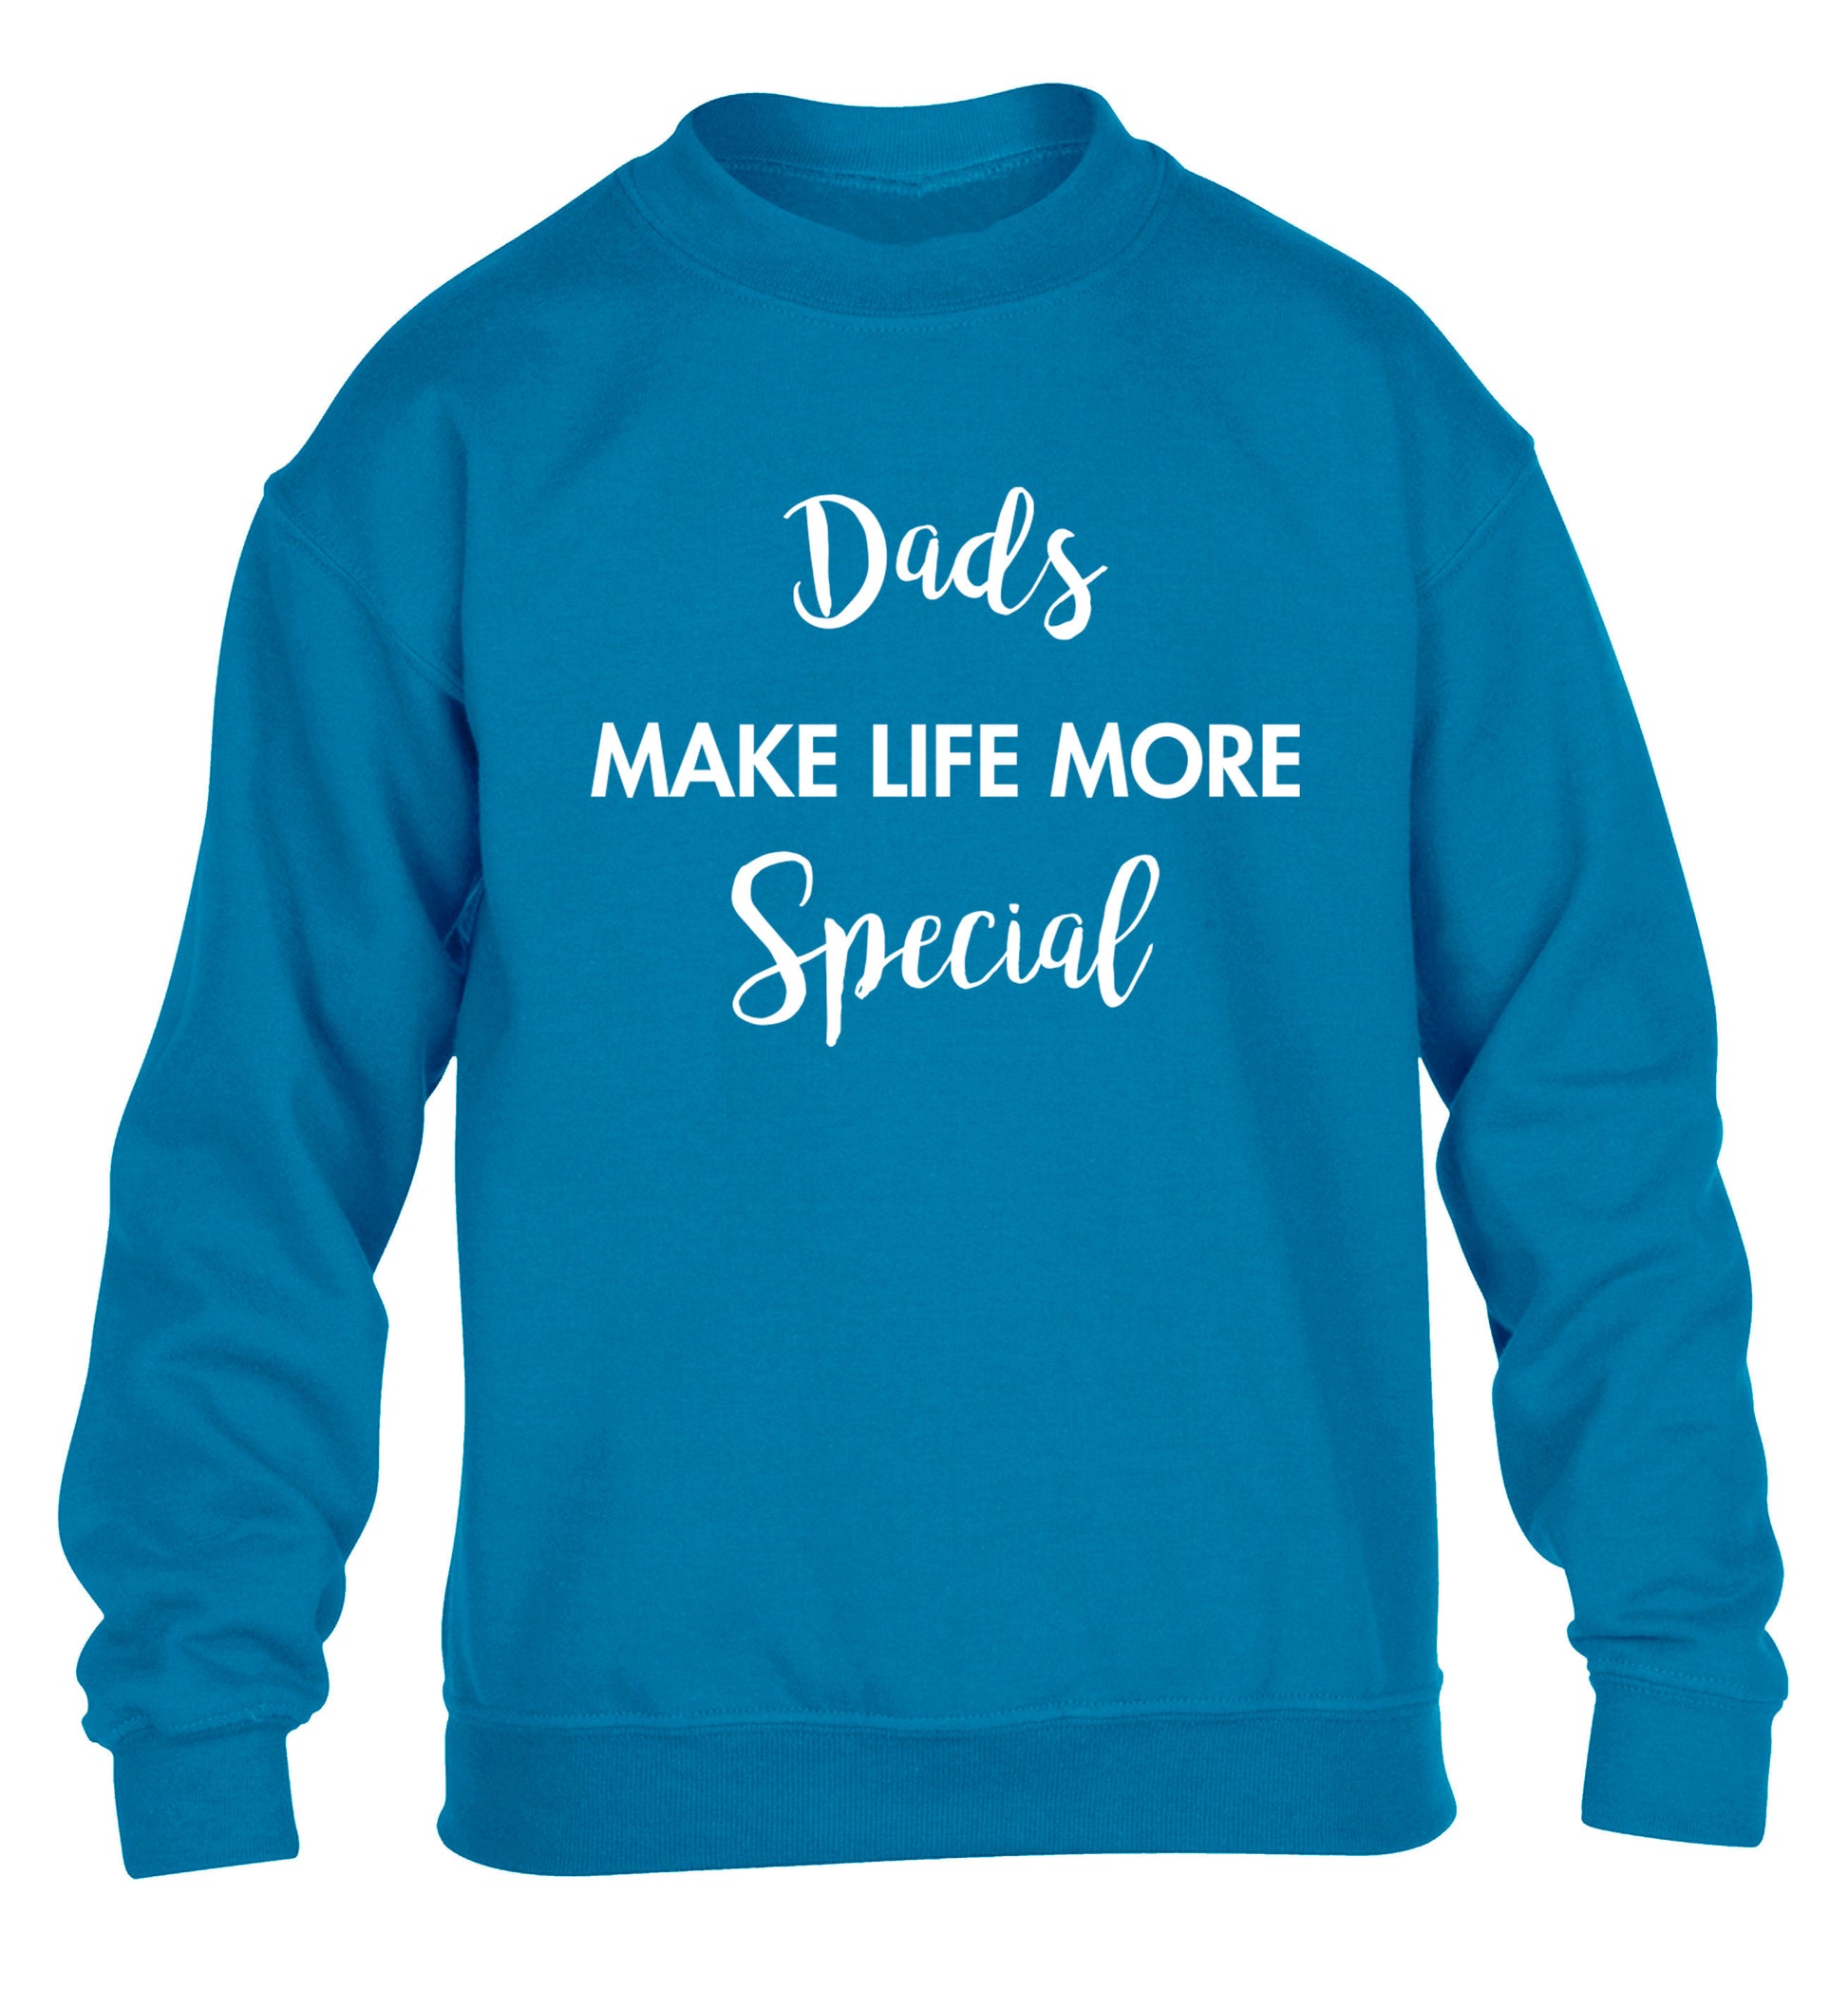 Dads make life more special children's blue sweater 12-14 Years